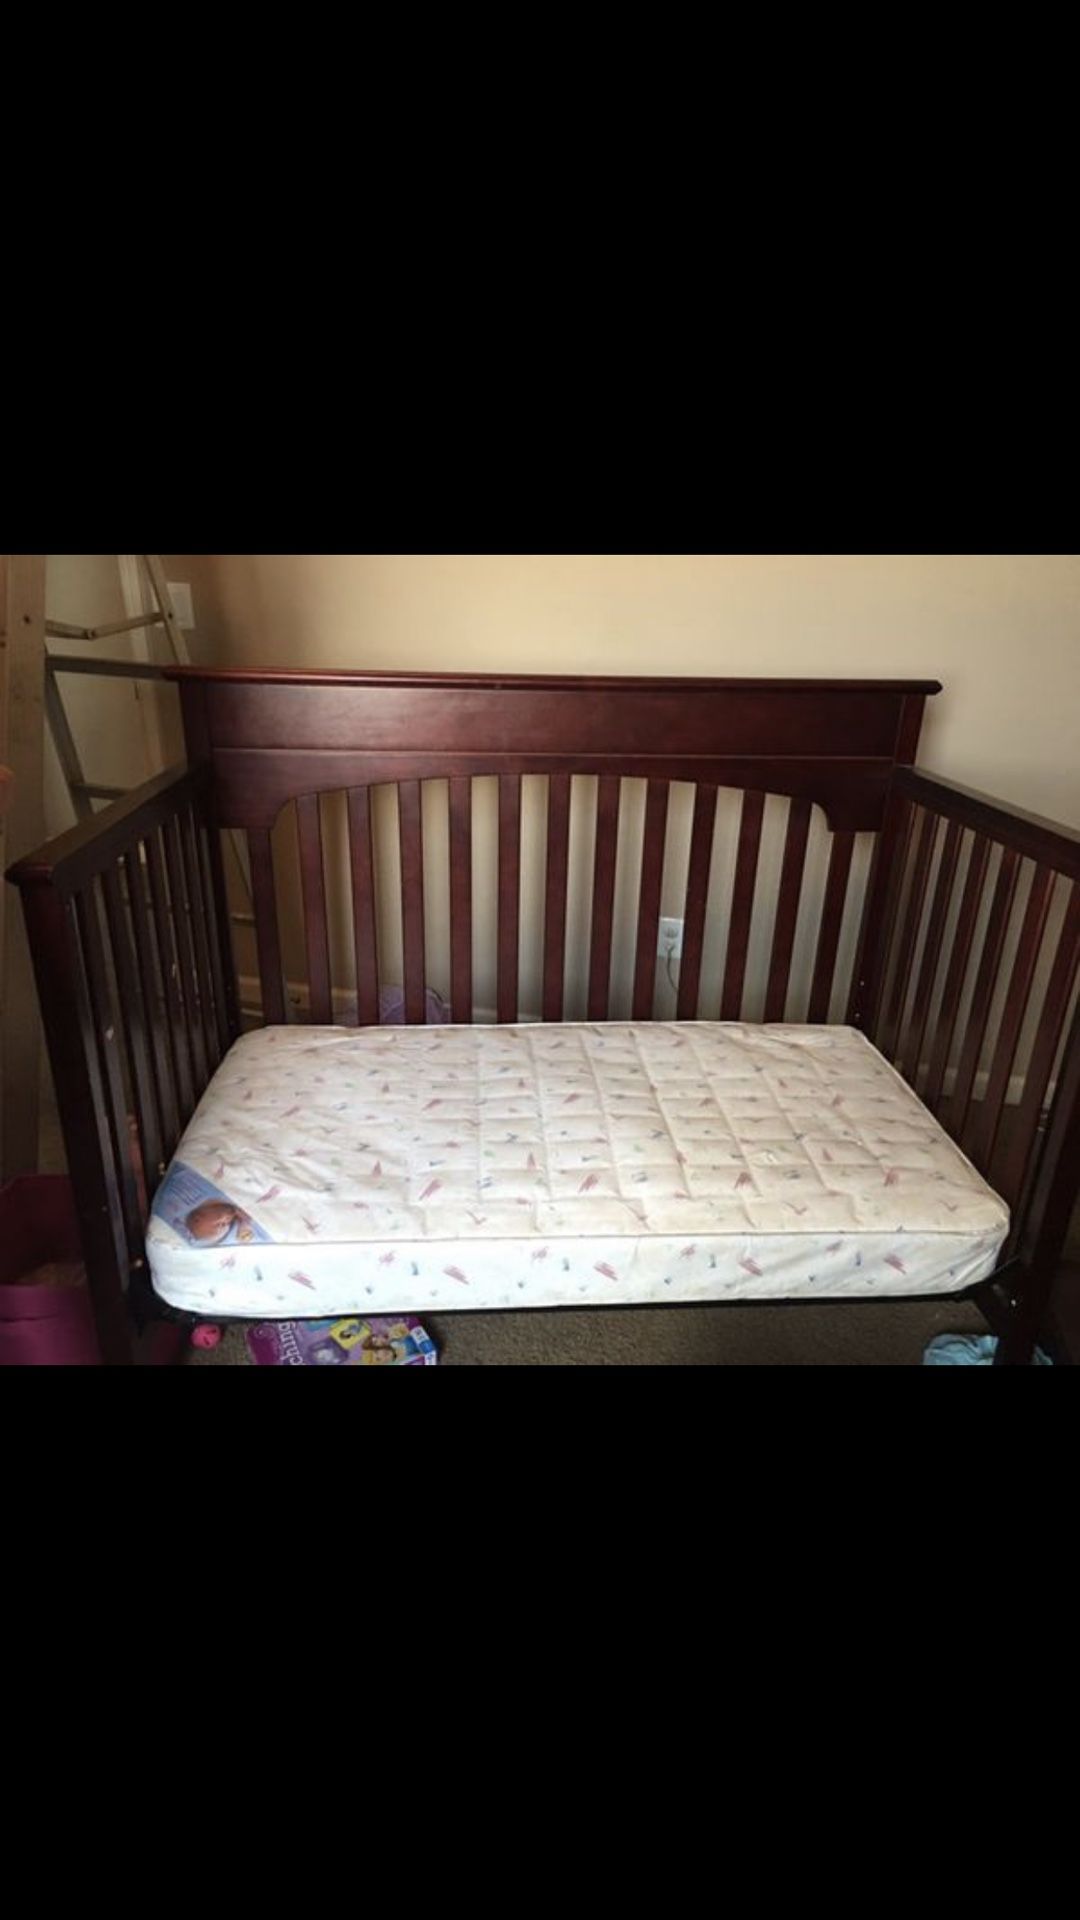 Graco Crib/Toddler Bed (w/ mattress) and matching Changing Table!